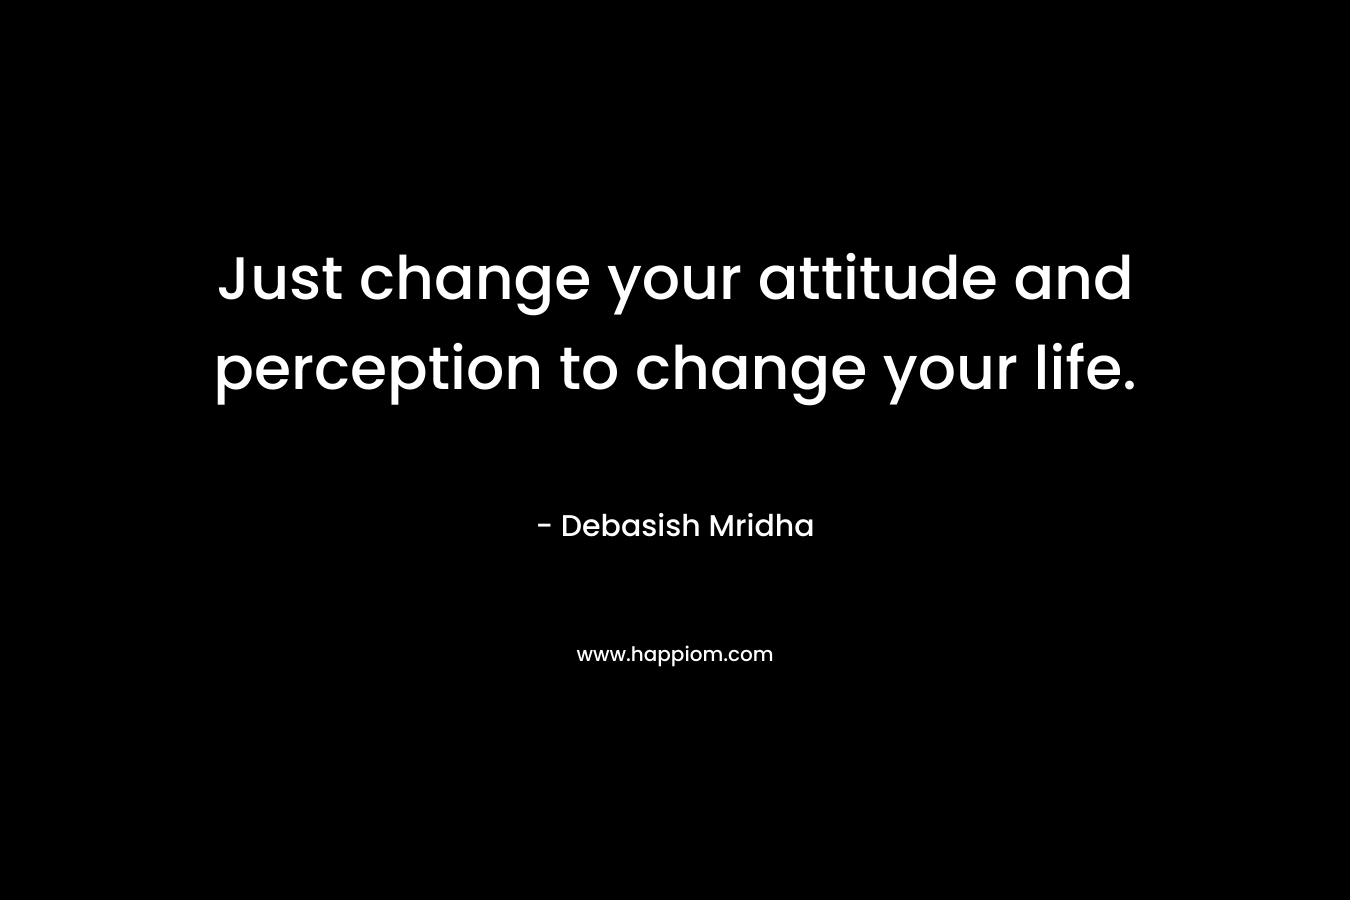 Just change your attitude and perception to change your life.